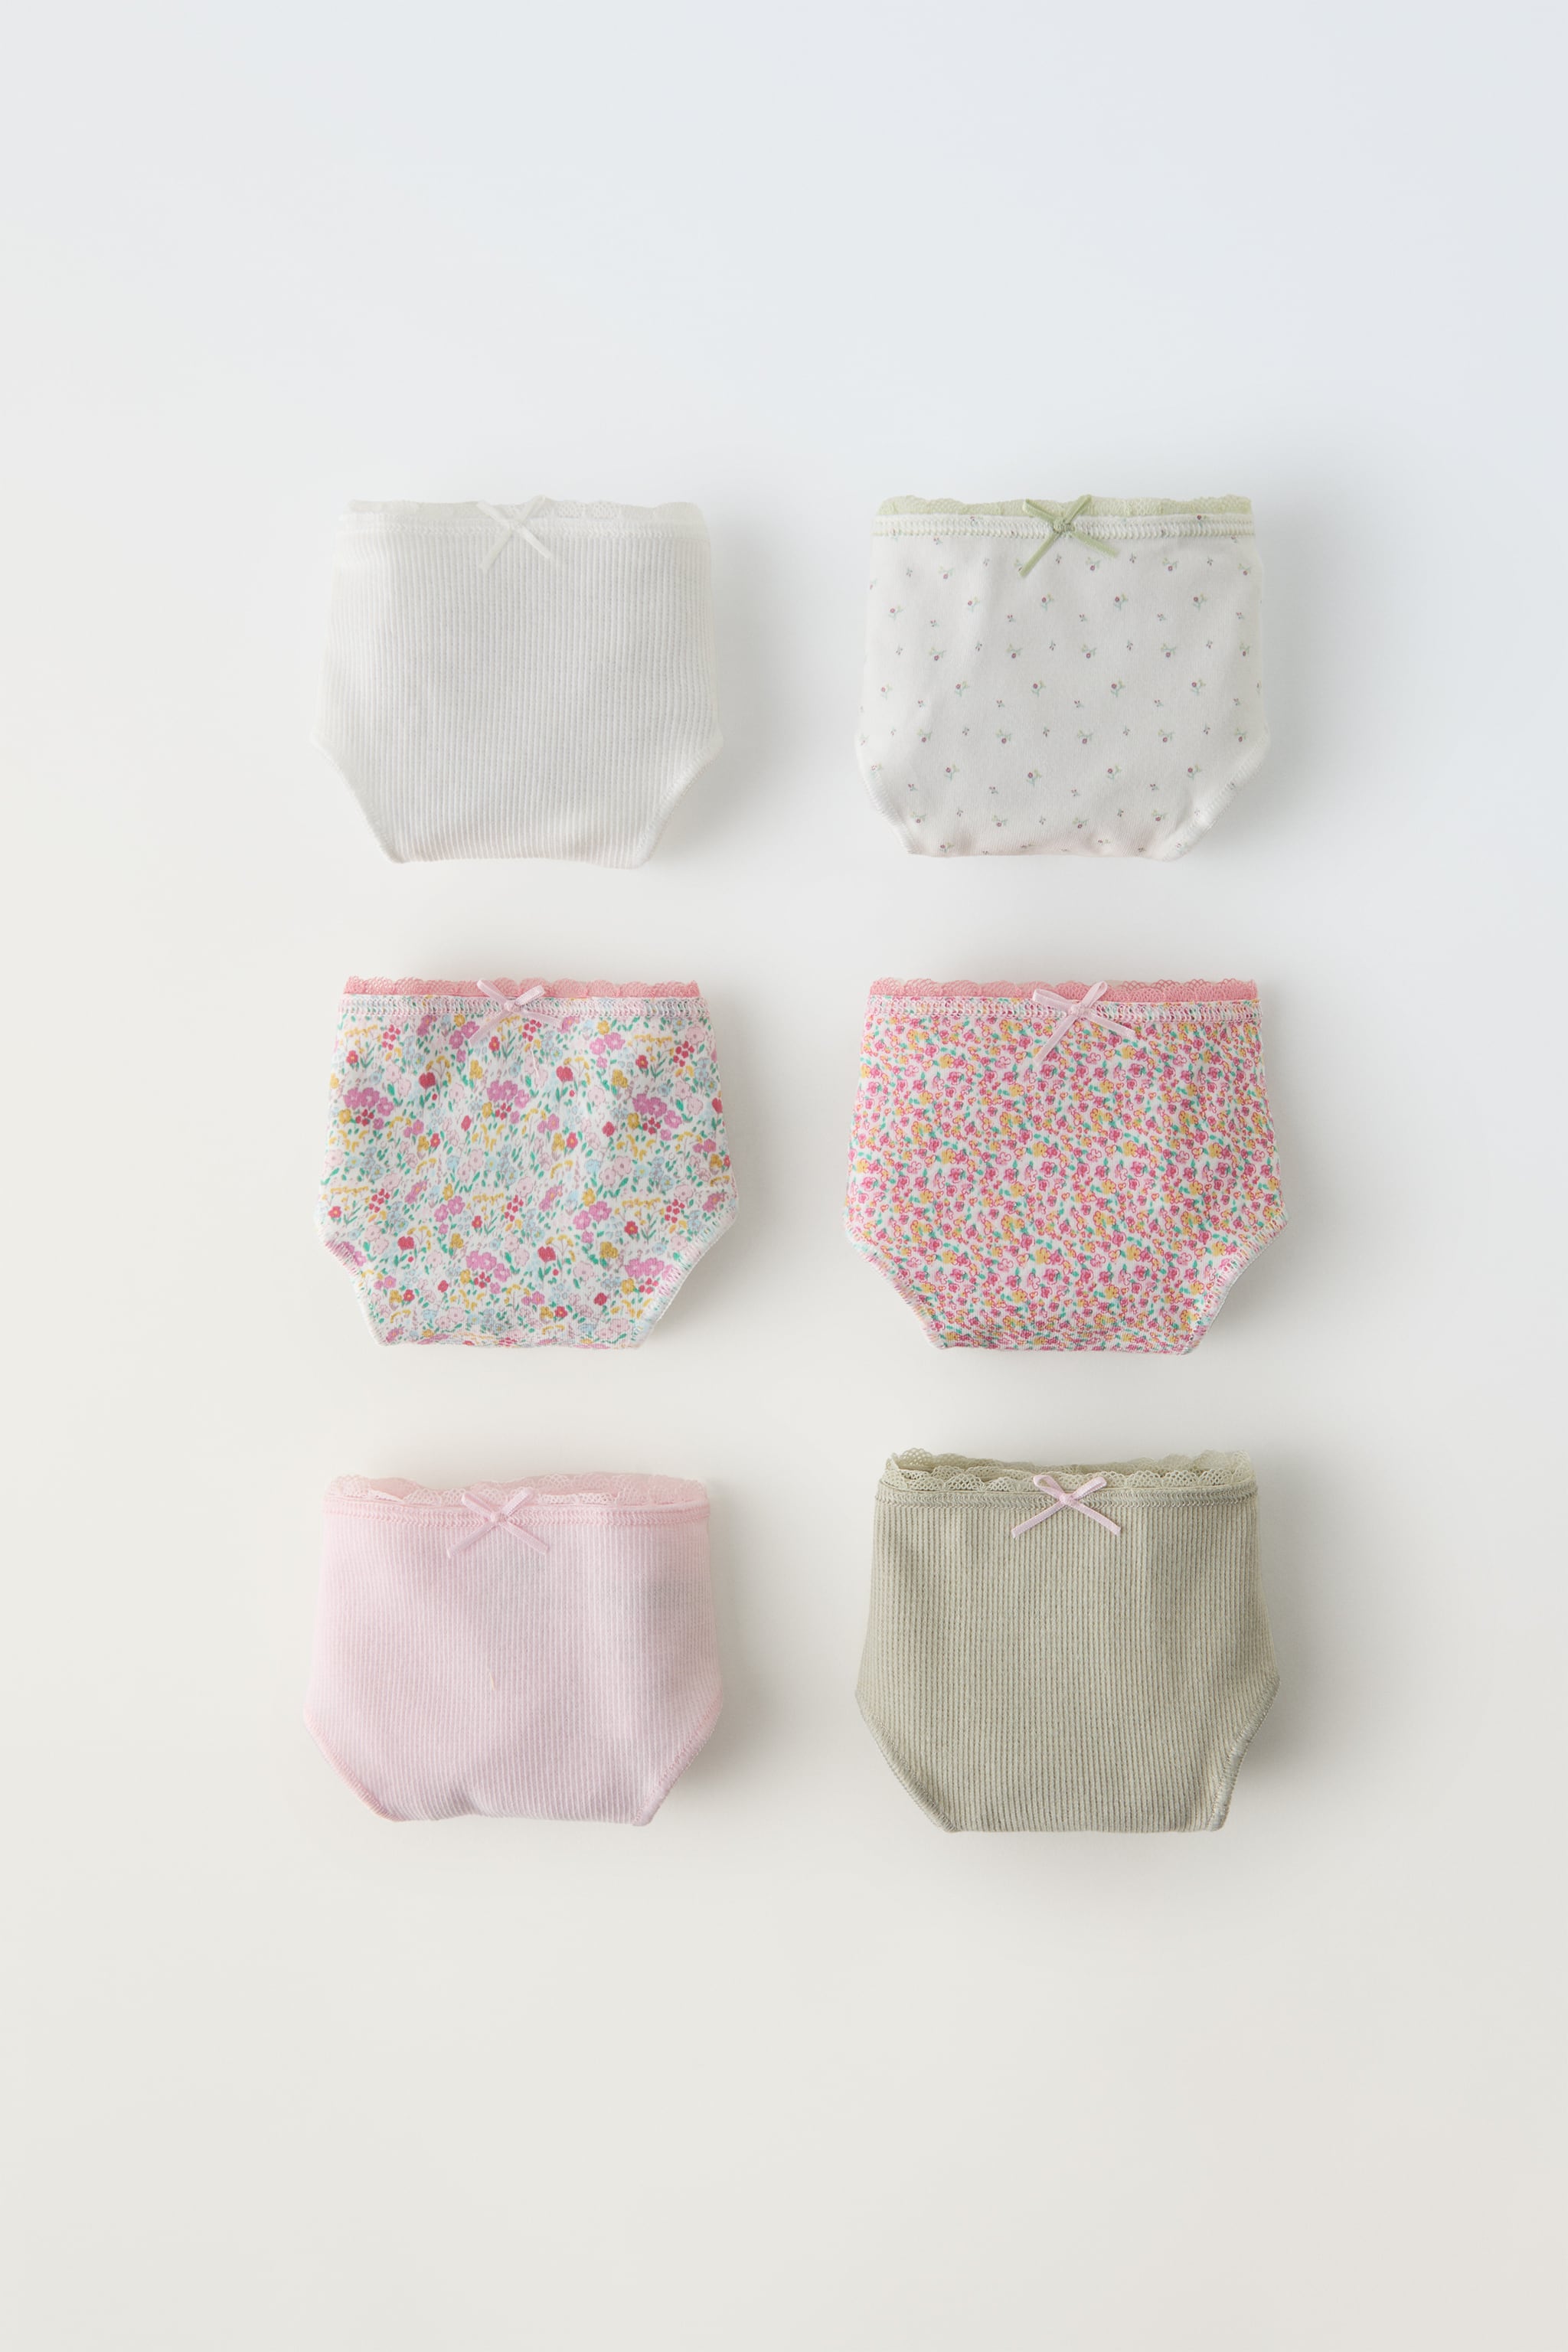 2-14 YEARS/ SIX-PACK OF FLORAL UNDERWEAR